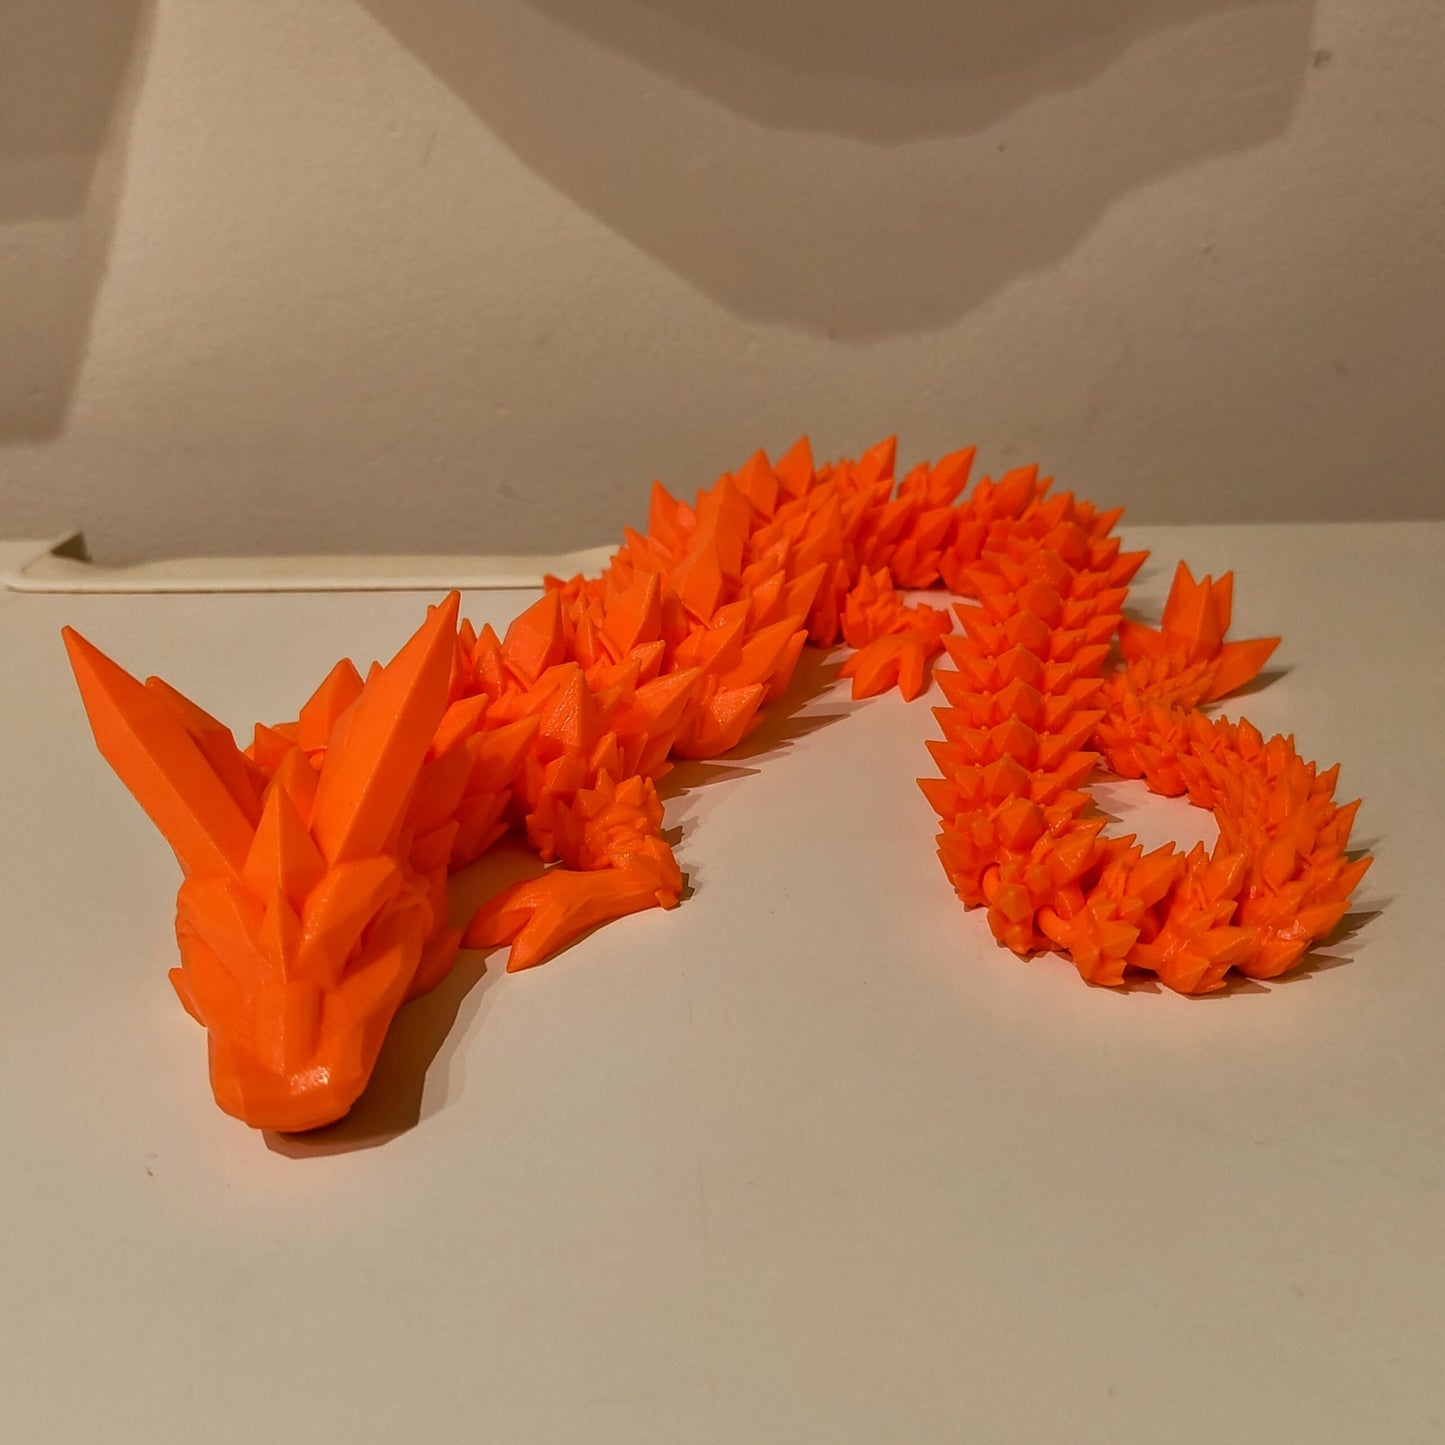 mesmerizing-crystal-articulating-dragon-fidget-toy-3d-printed-stress-relief